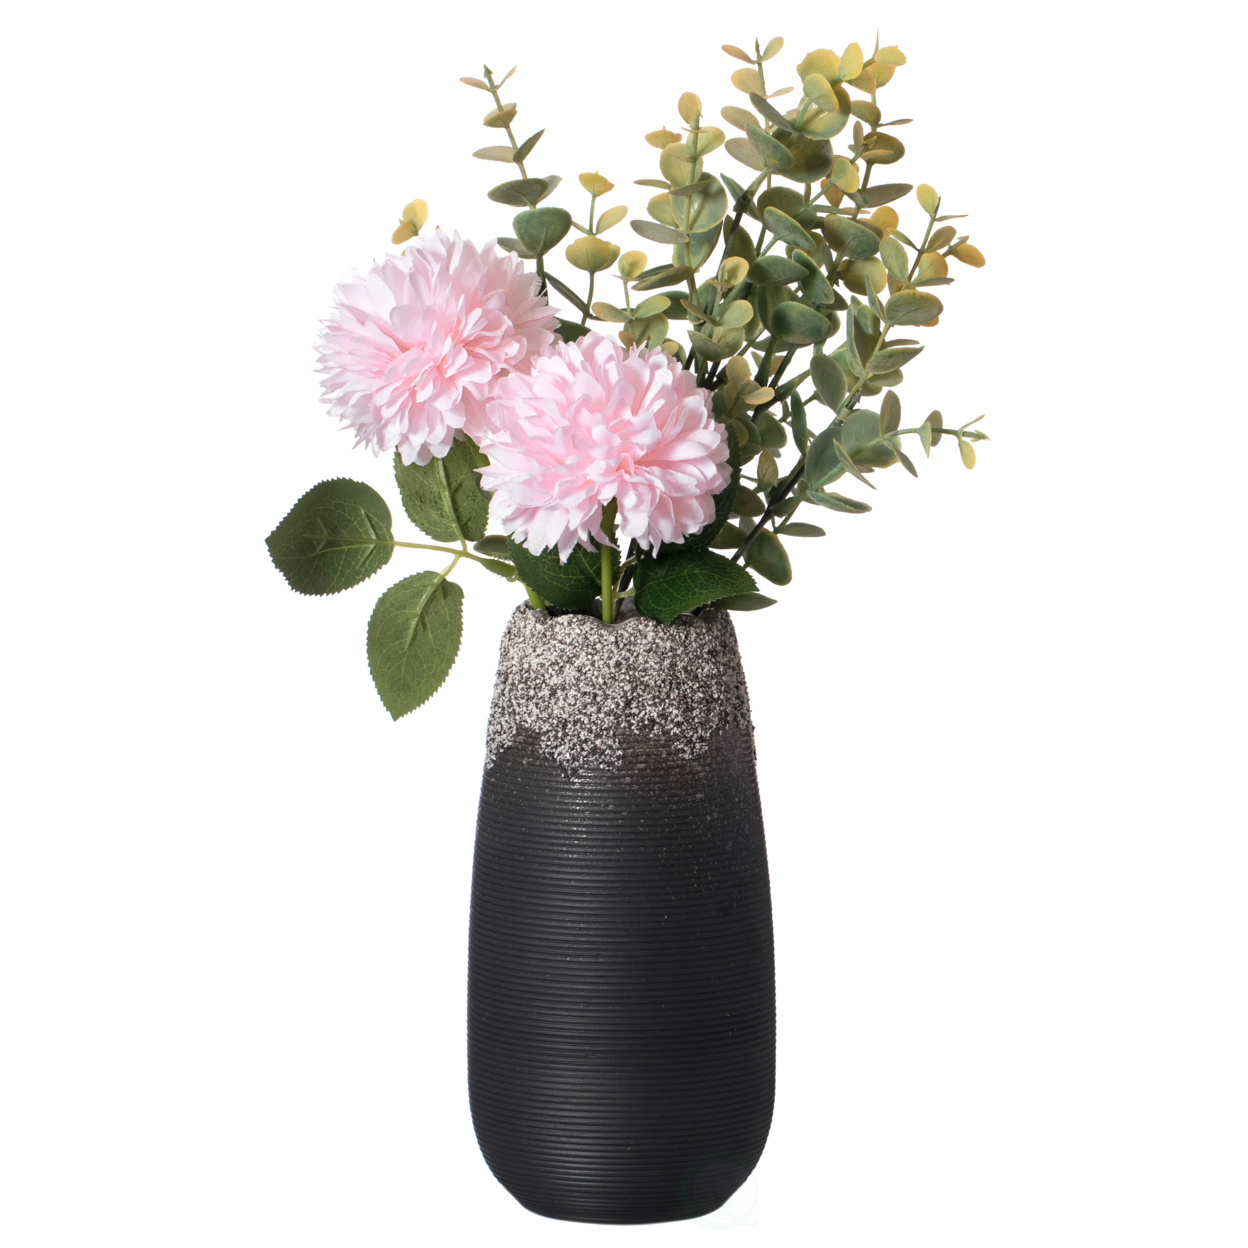 Contemporary Black Table Vase With Dripping Crystal Look And Scalloped Opening Design - Small